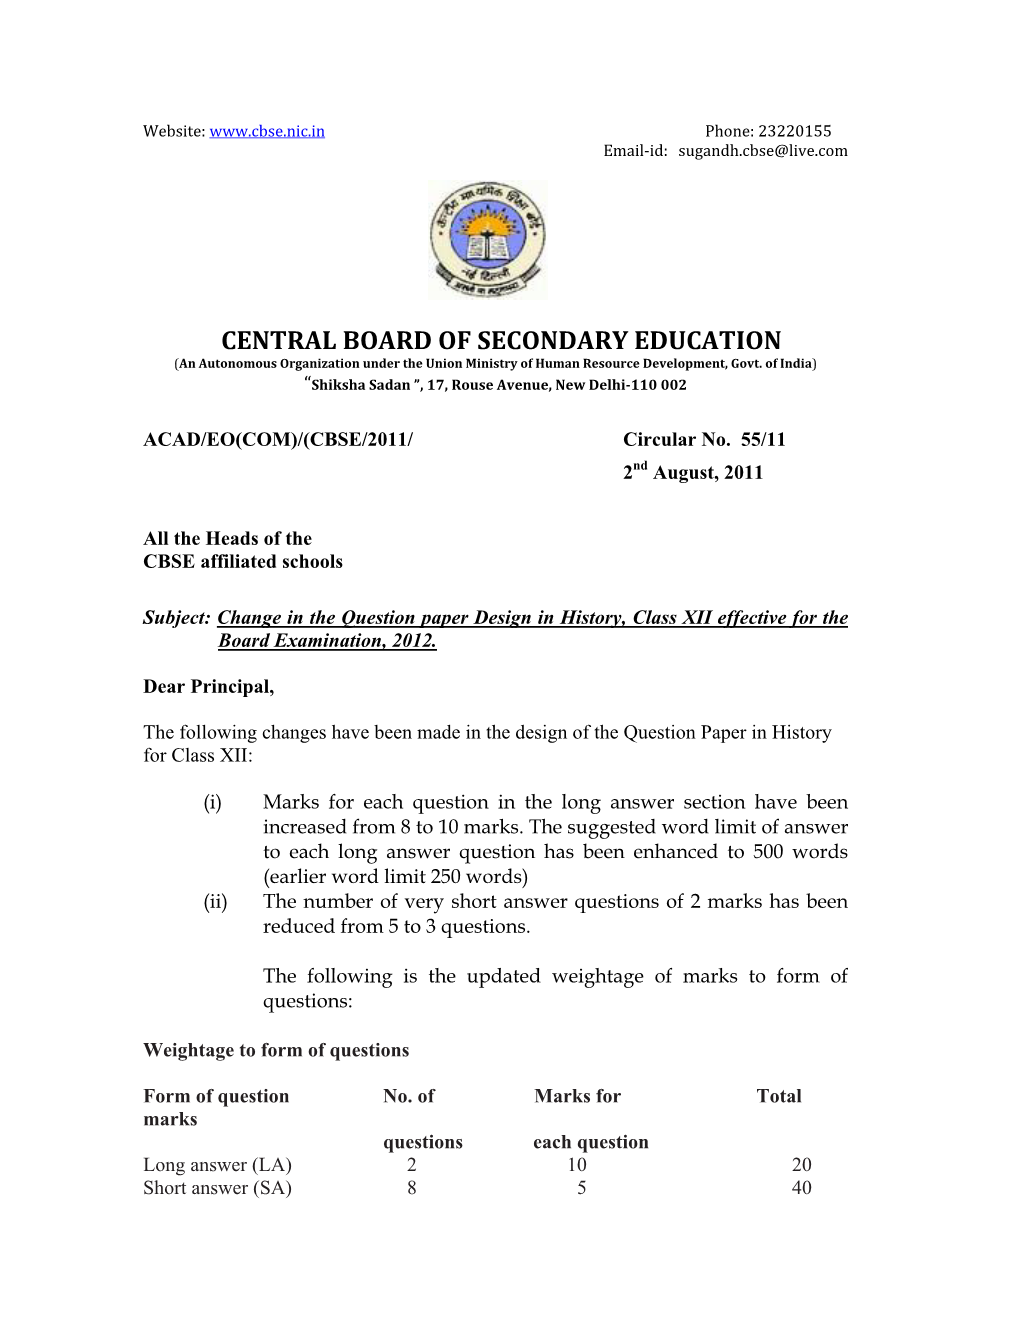 CENTRAL BOARD of SECONDARY EDUCATION (An Autonomous Organization Under the Union Ministry of Human Resource Development, Govt